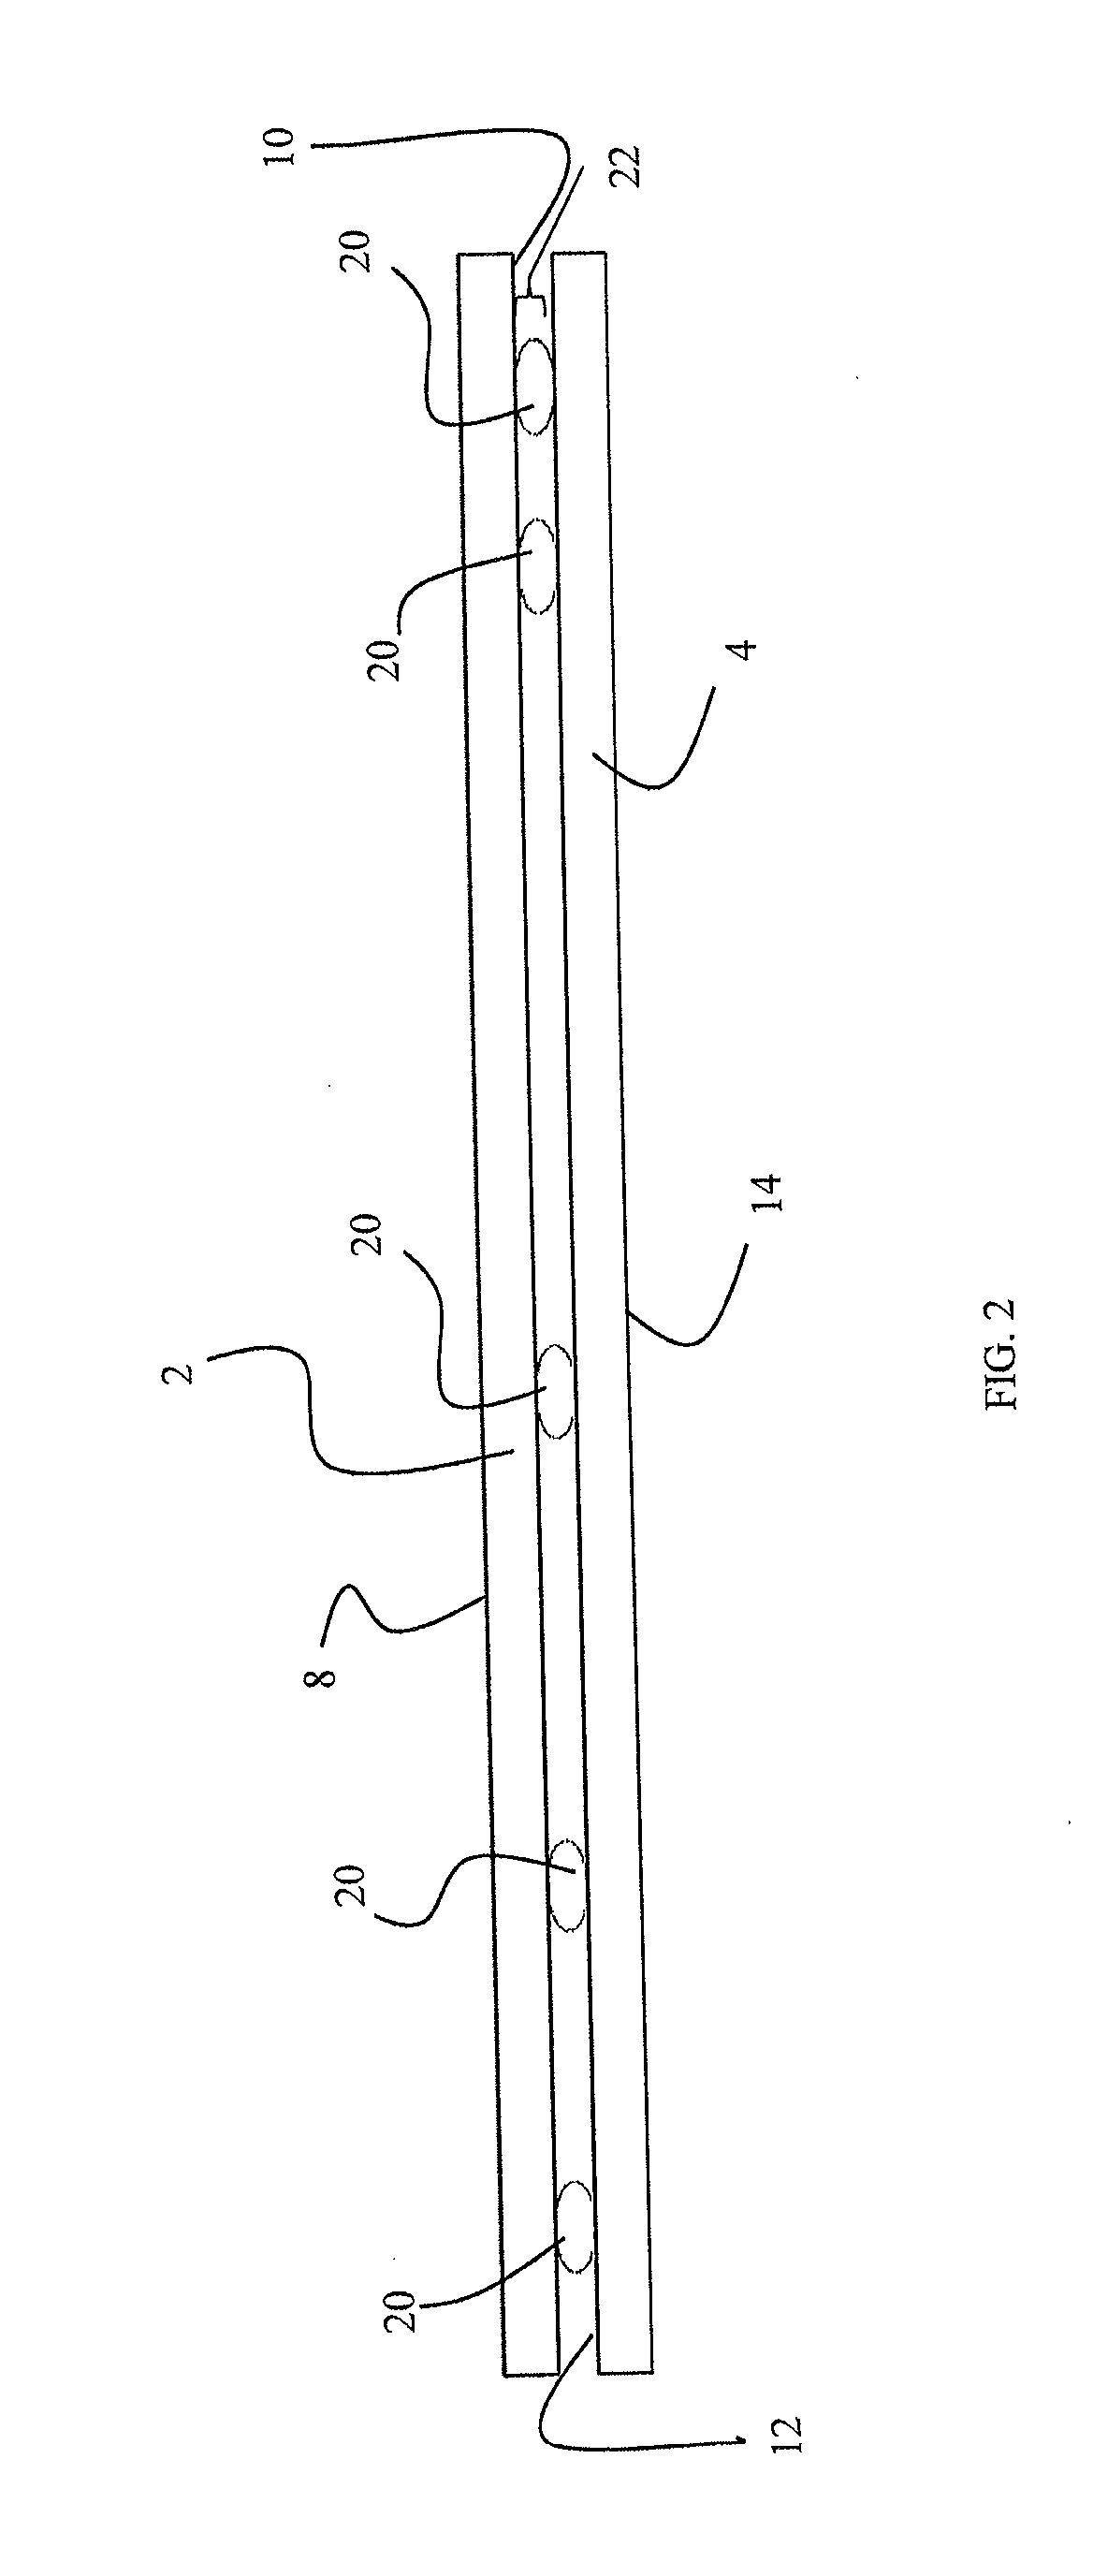 Method and device for transporting patients between target modalities using rollers